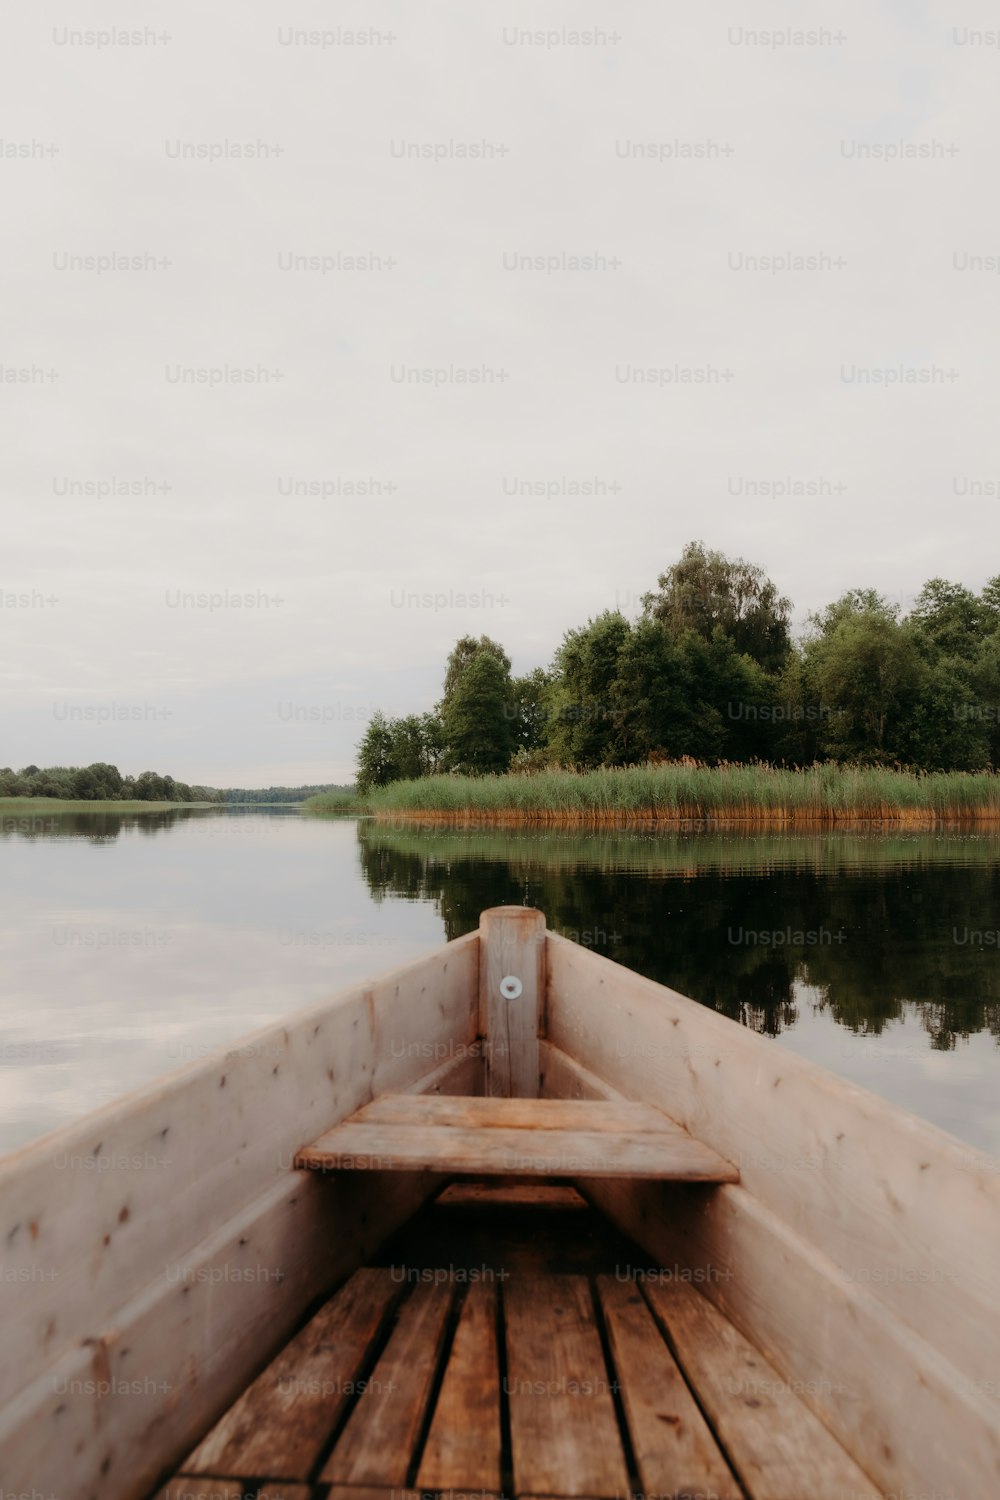 a boat on a body of water with trees in the background